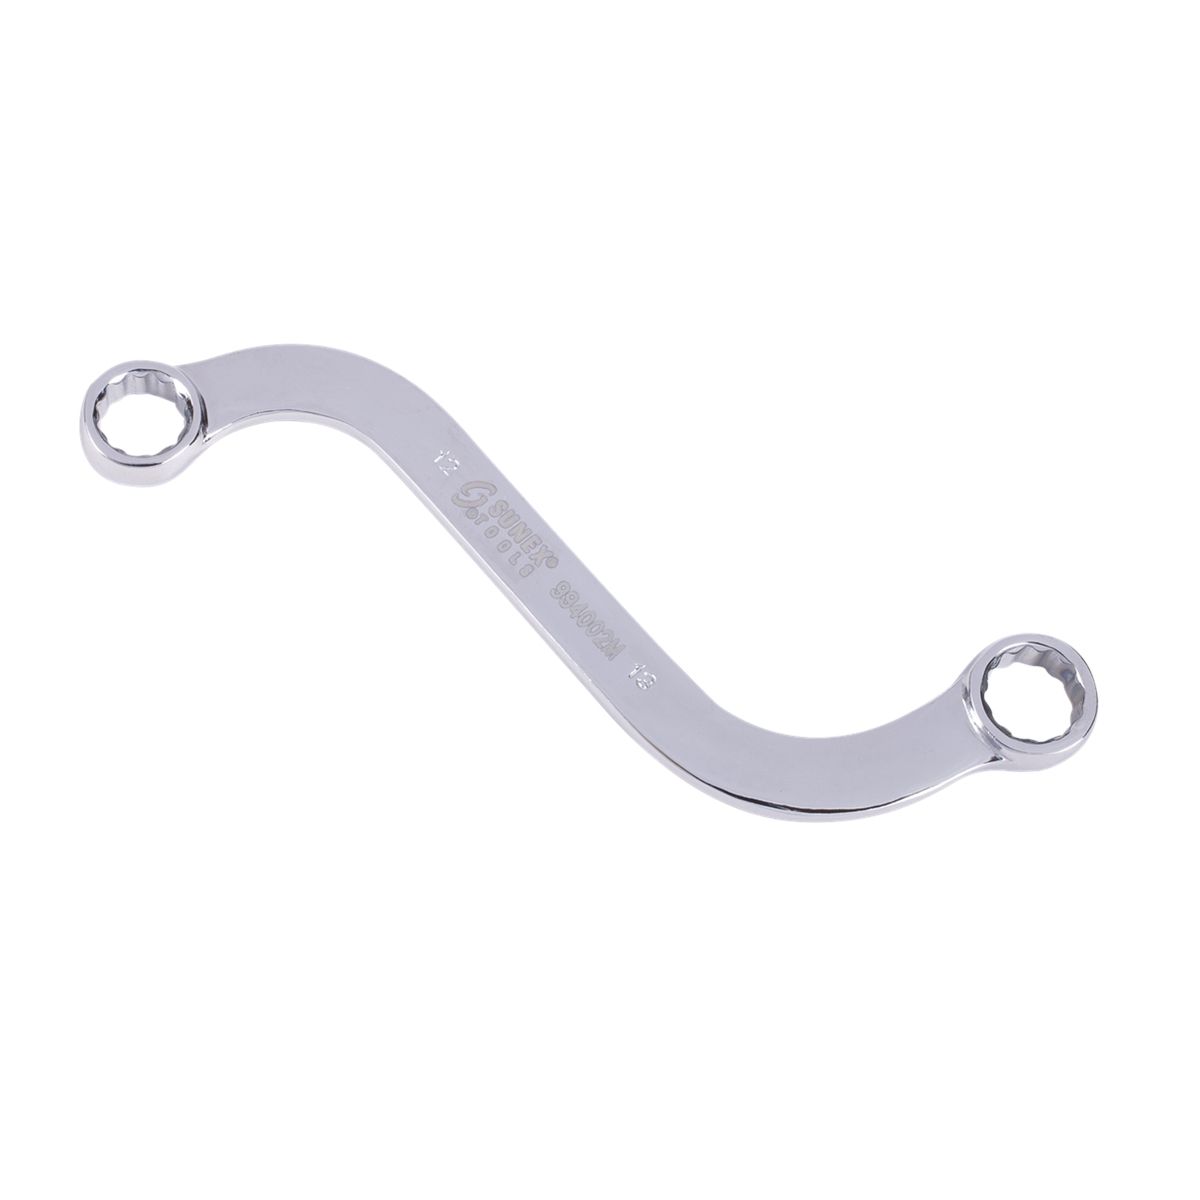 12mm x 13mm S-Style Box Wrench